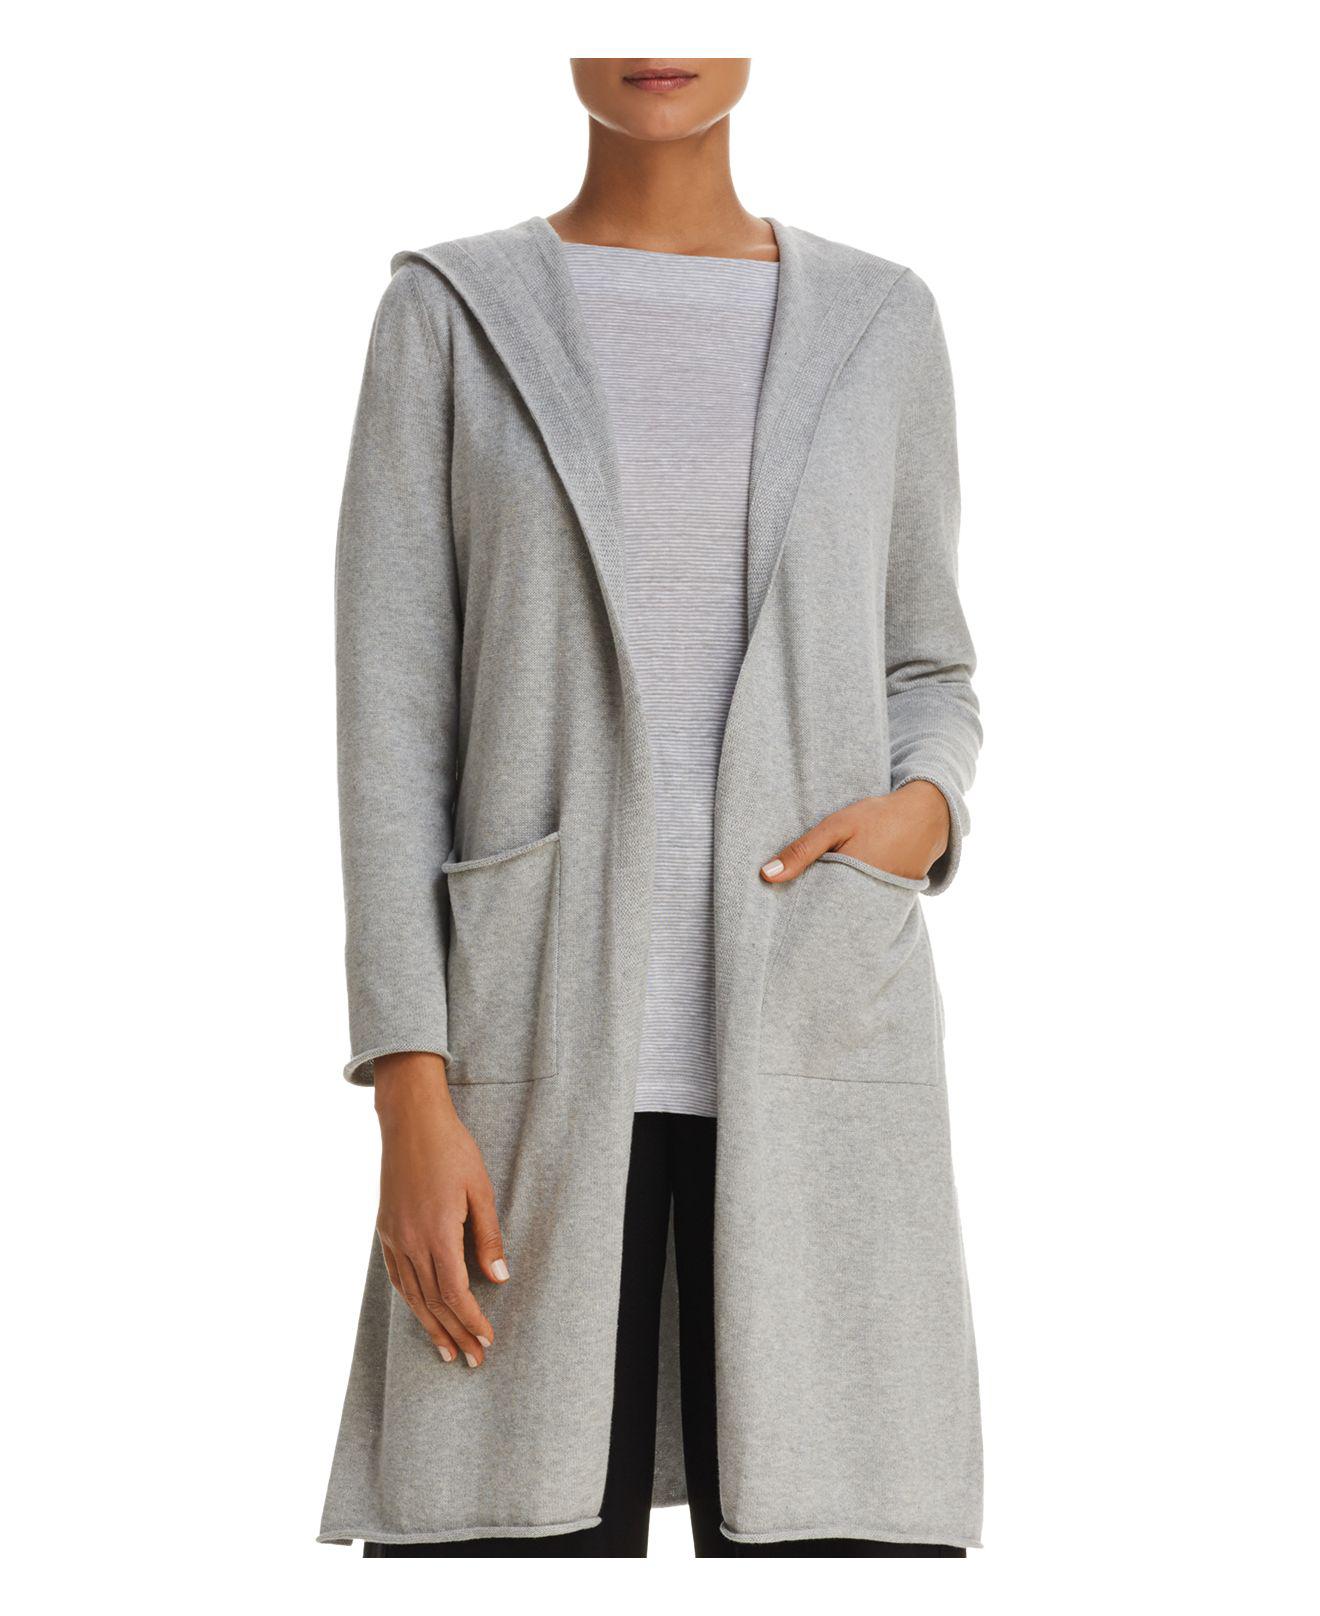 Lyst - Eileen Fisher Hooded Duster Cardigan in Gray